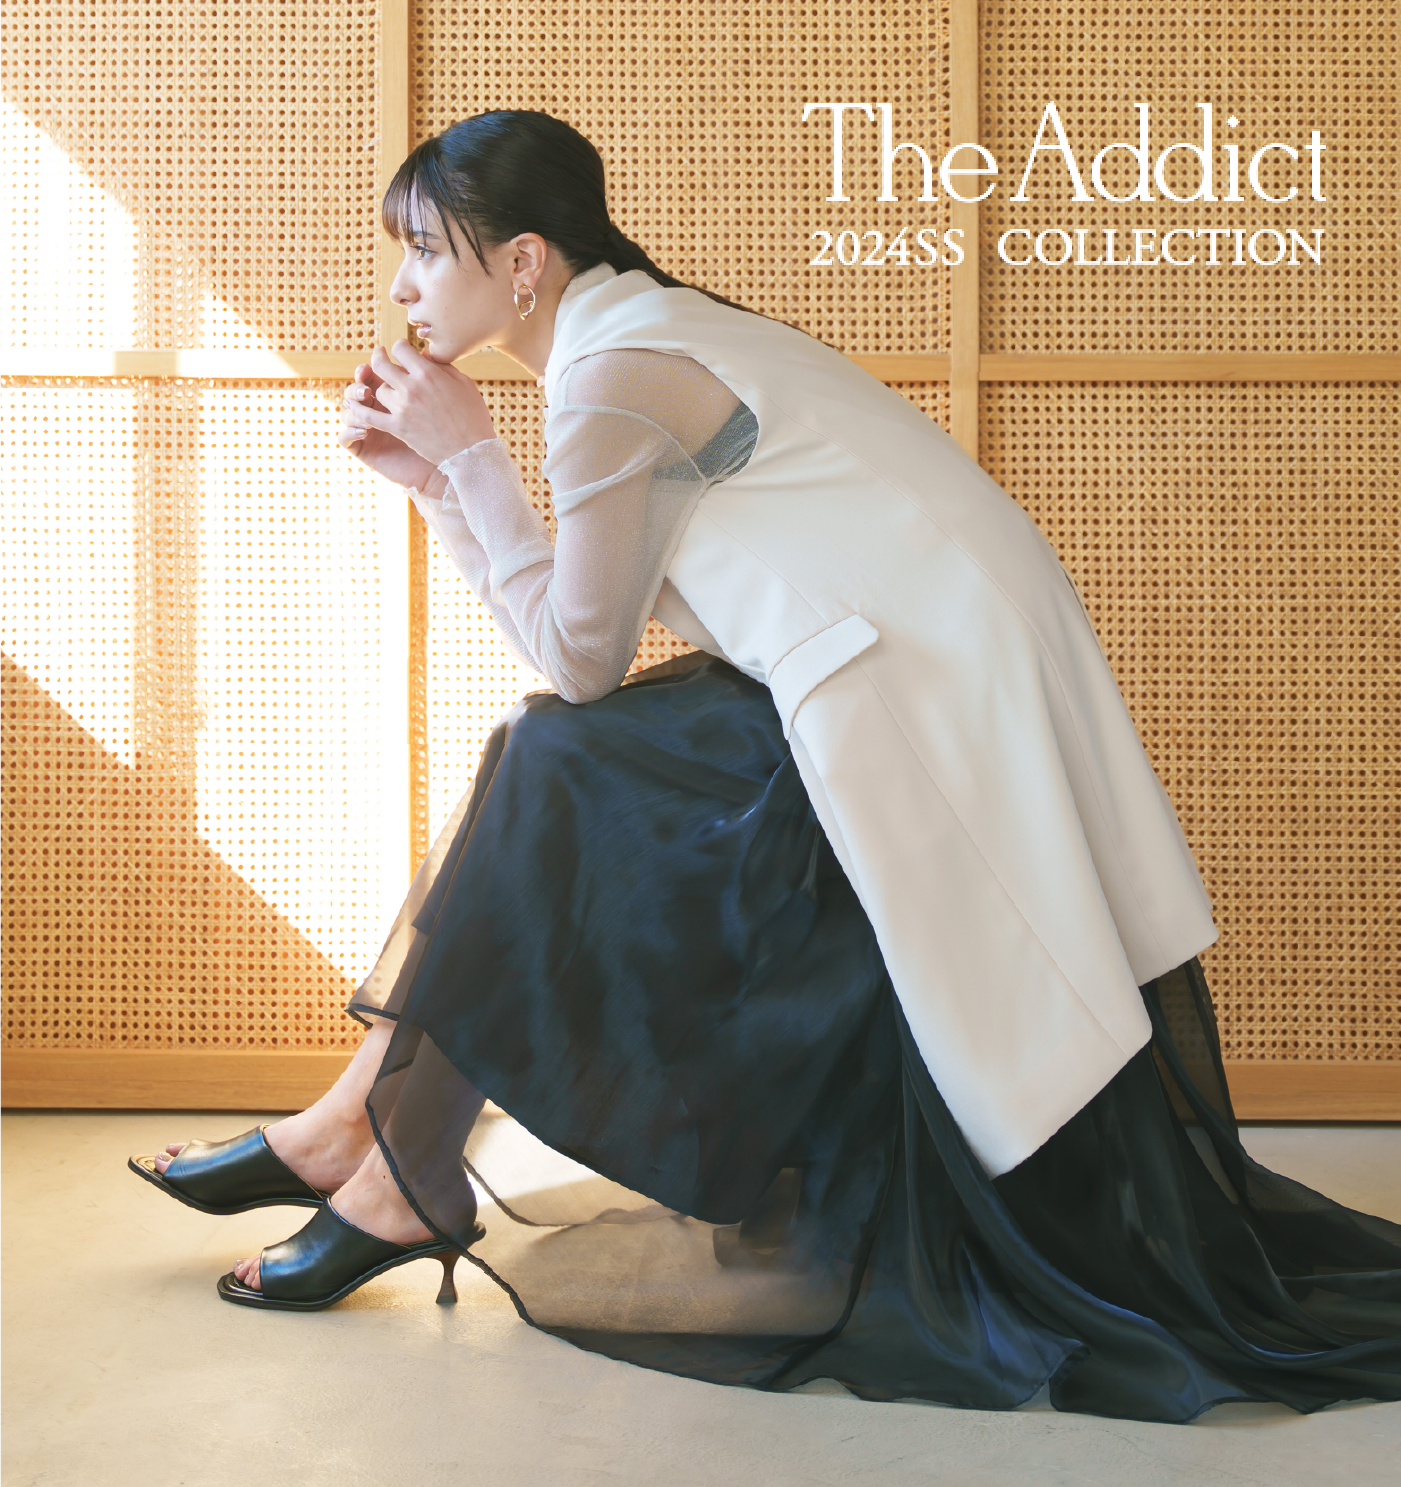 The Addict 2024 SS COLLECTION 銀座かねまつ公式通販サイト｜SHOES 